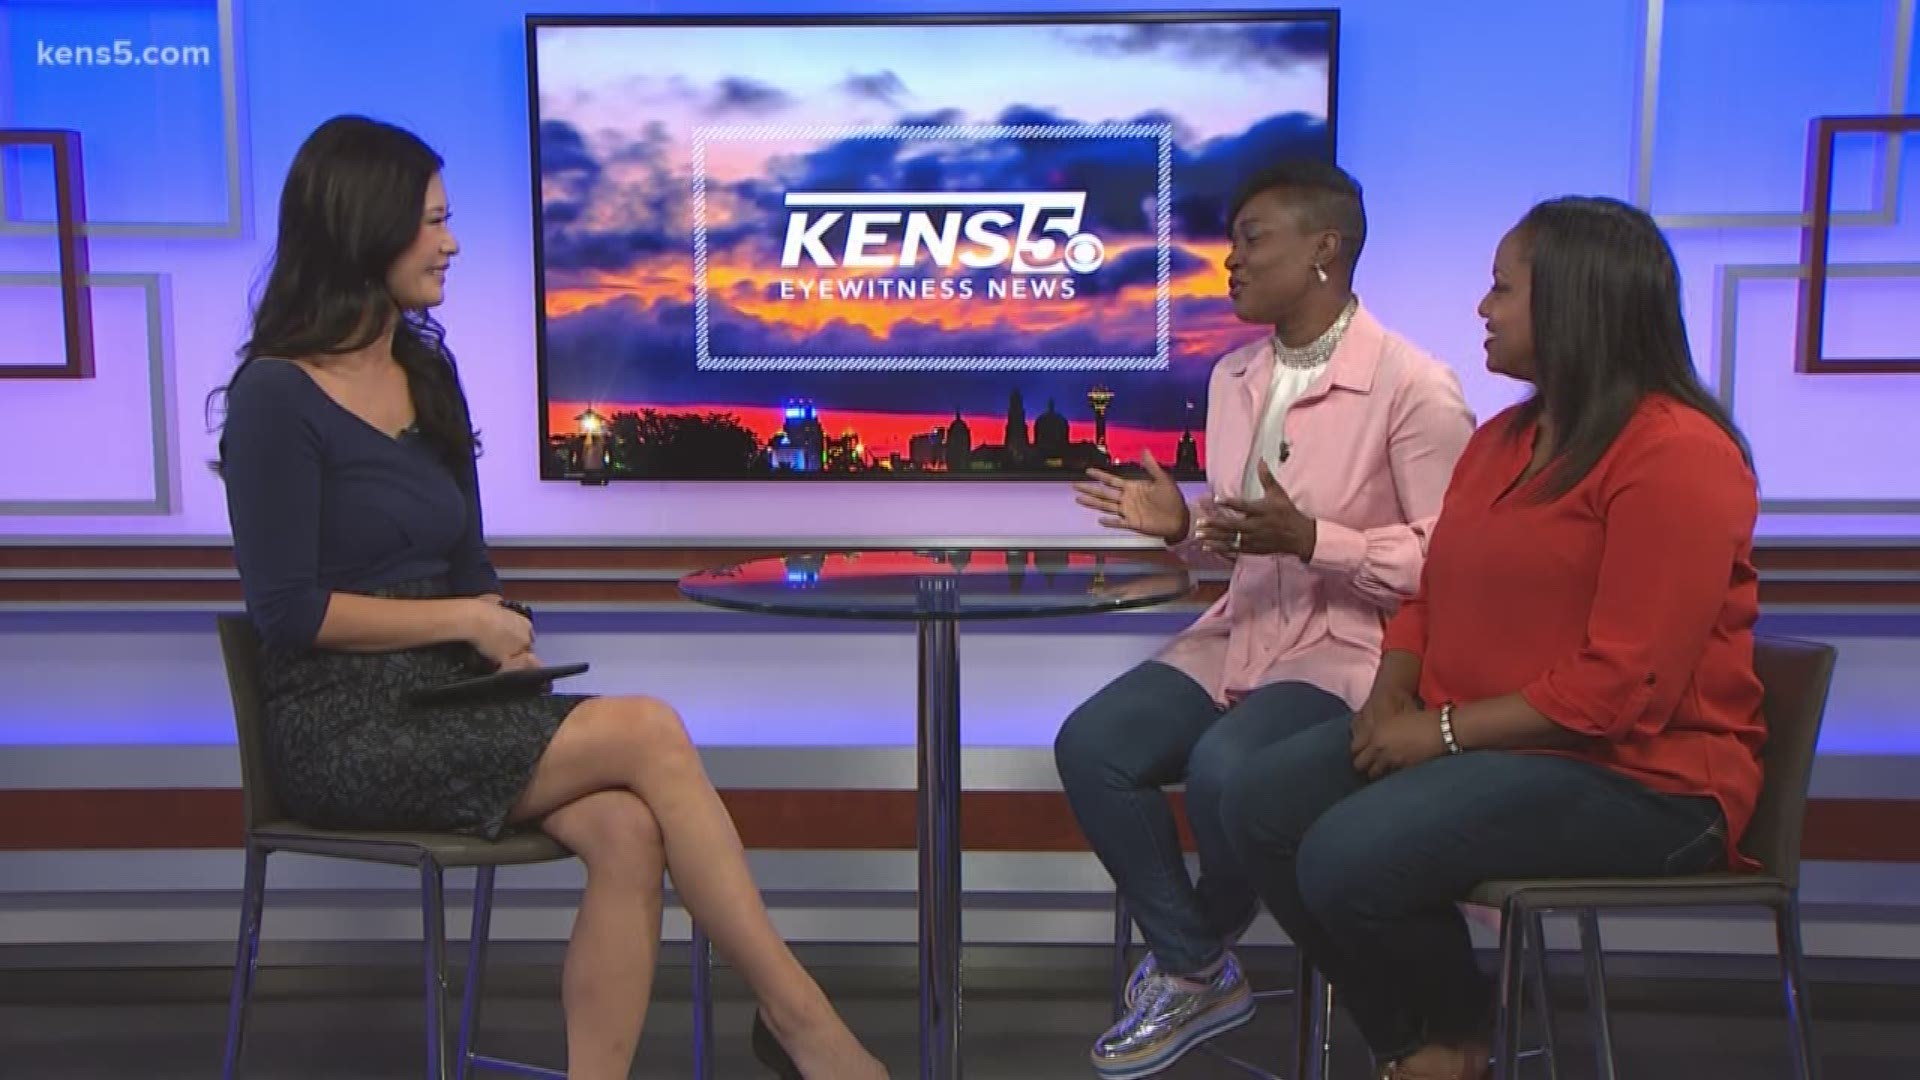 A local church is going outside its four walls to cast people for an upcoming production, featuring Grammy Award Winner Fred Hammond. In the KENS 5 studio, Danielle Gulley and Karen Dunn share more about the production of "The King".